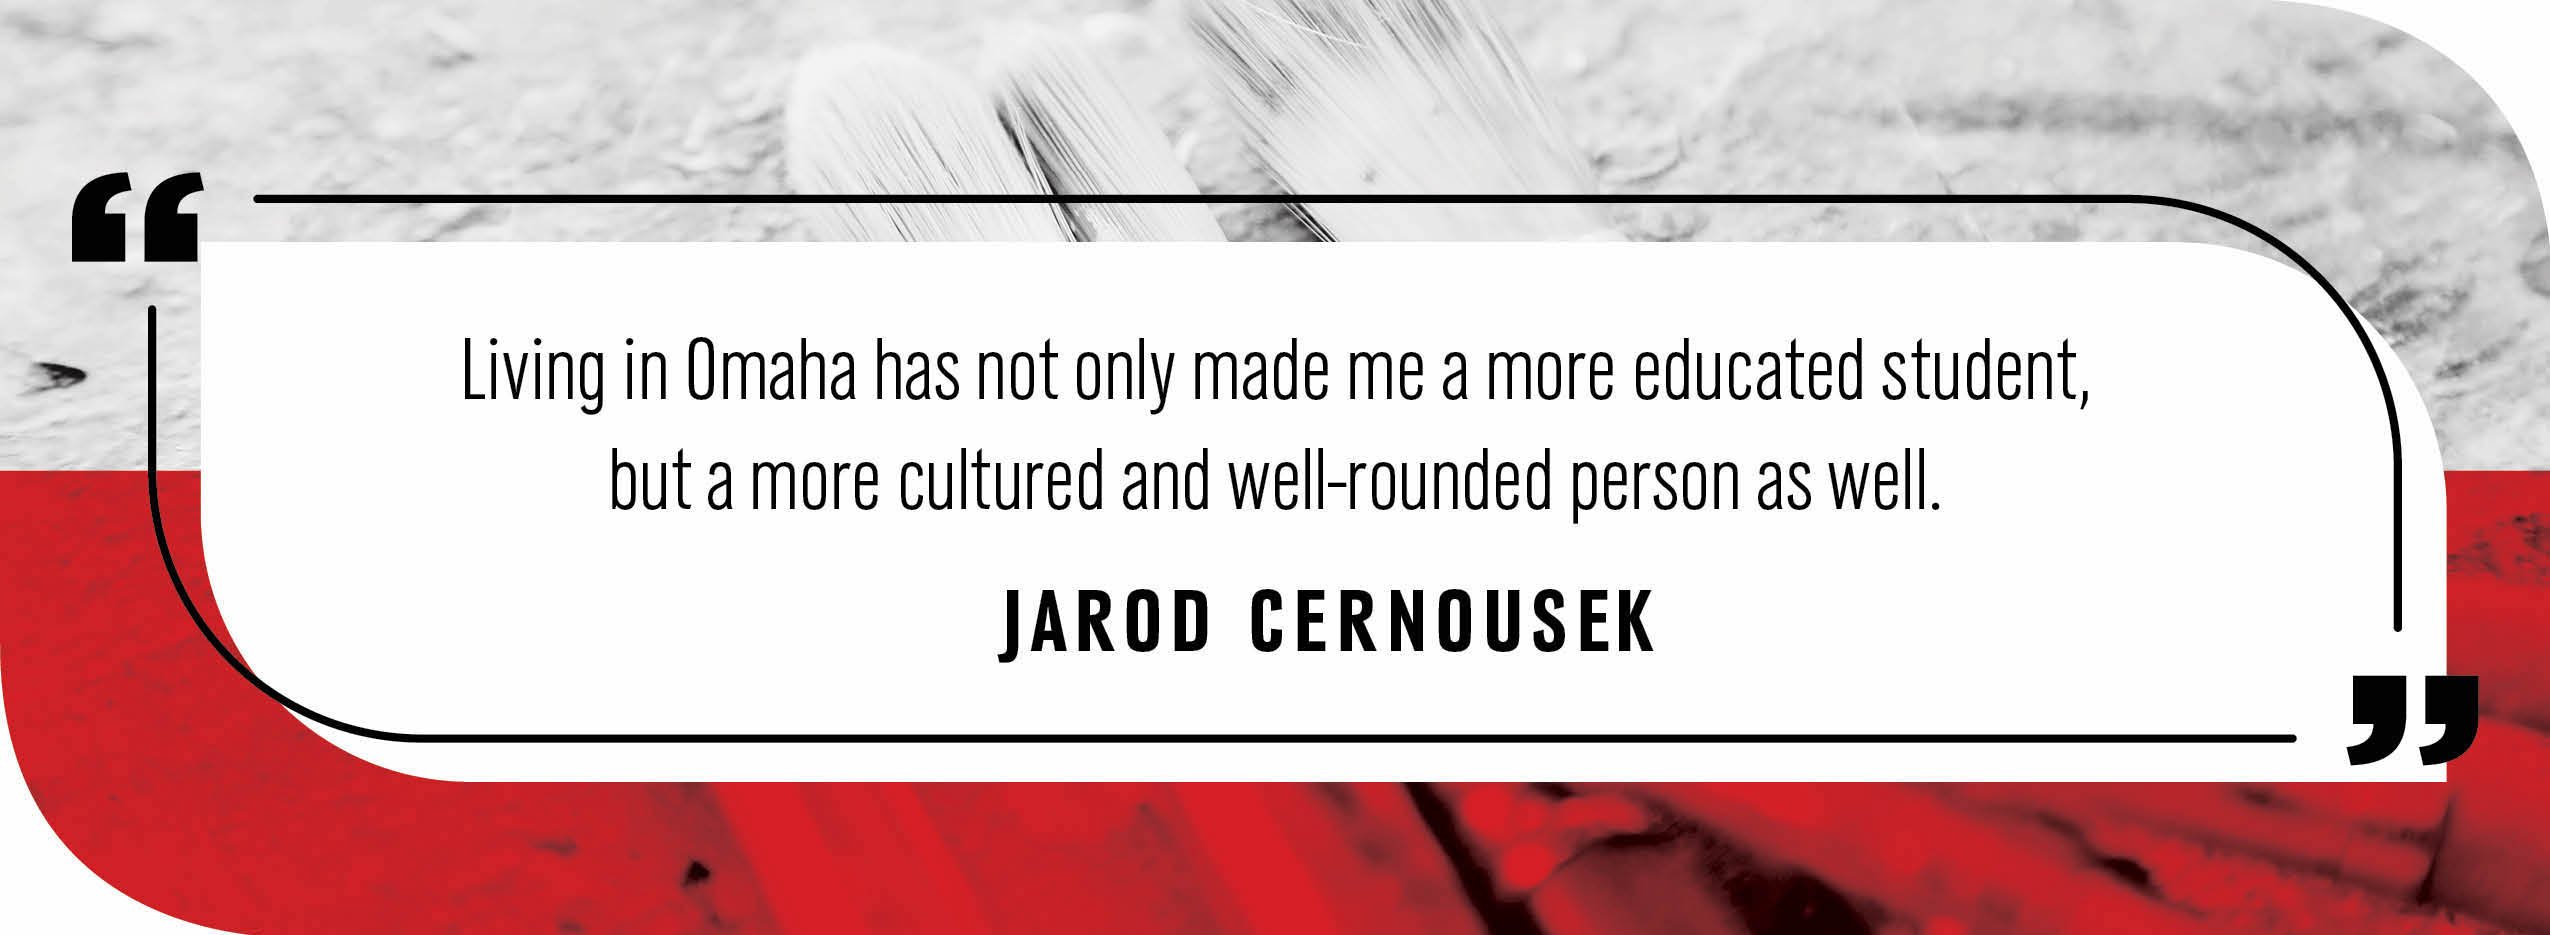 Quote by Jarod Cernousek: "Living in Omaha has not only made me a more educated student, but a more cultured and well-rounded person as well."